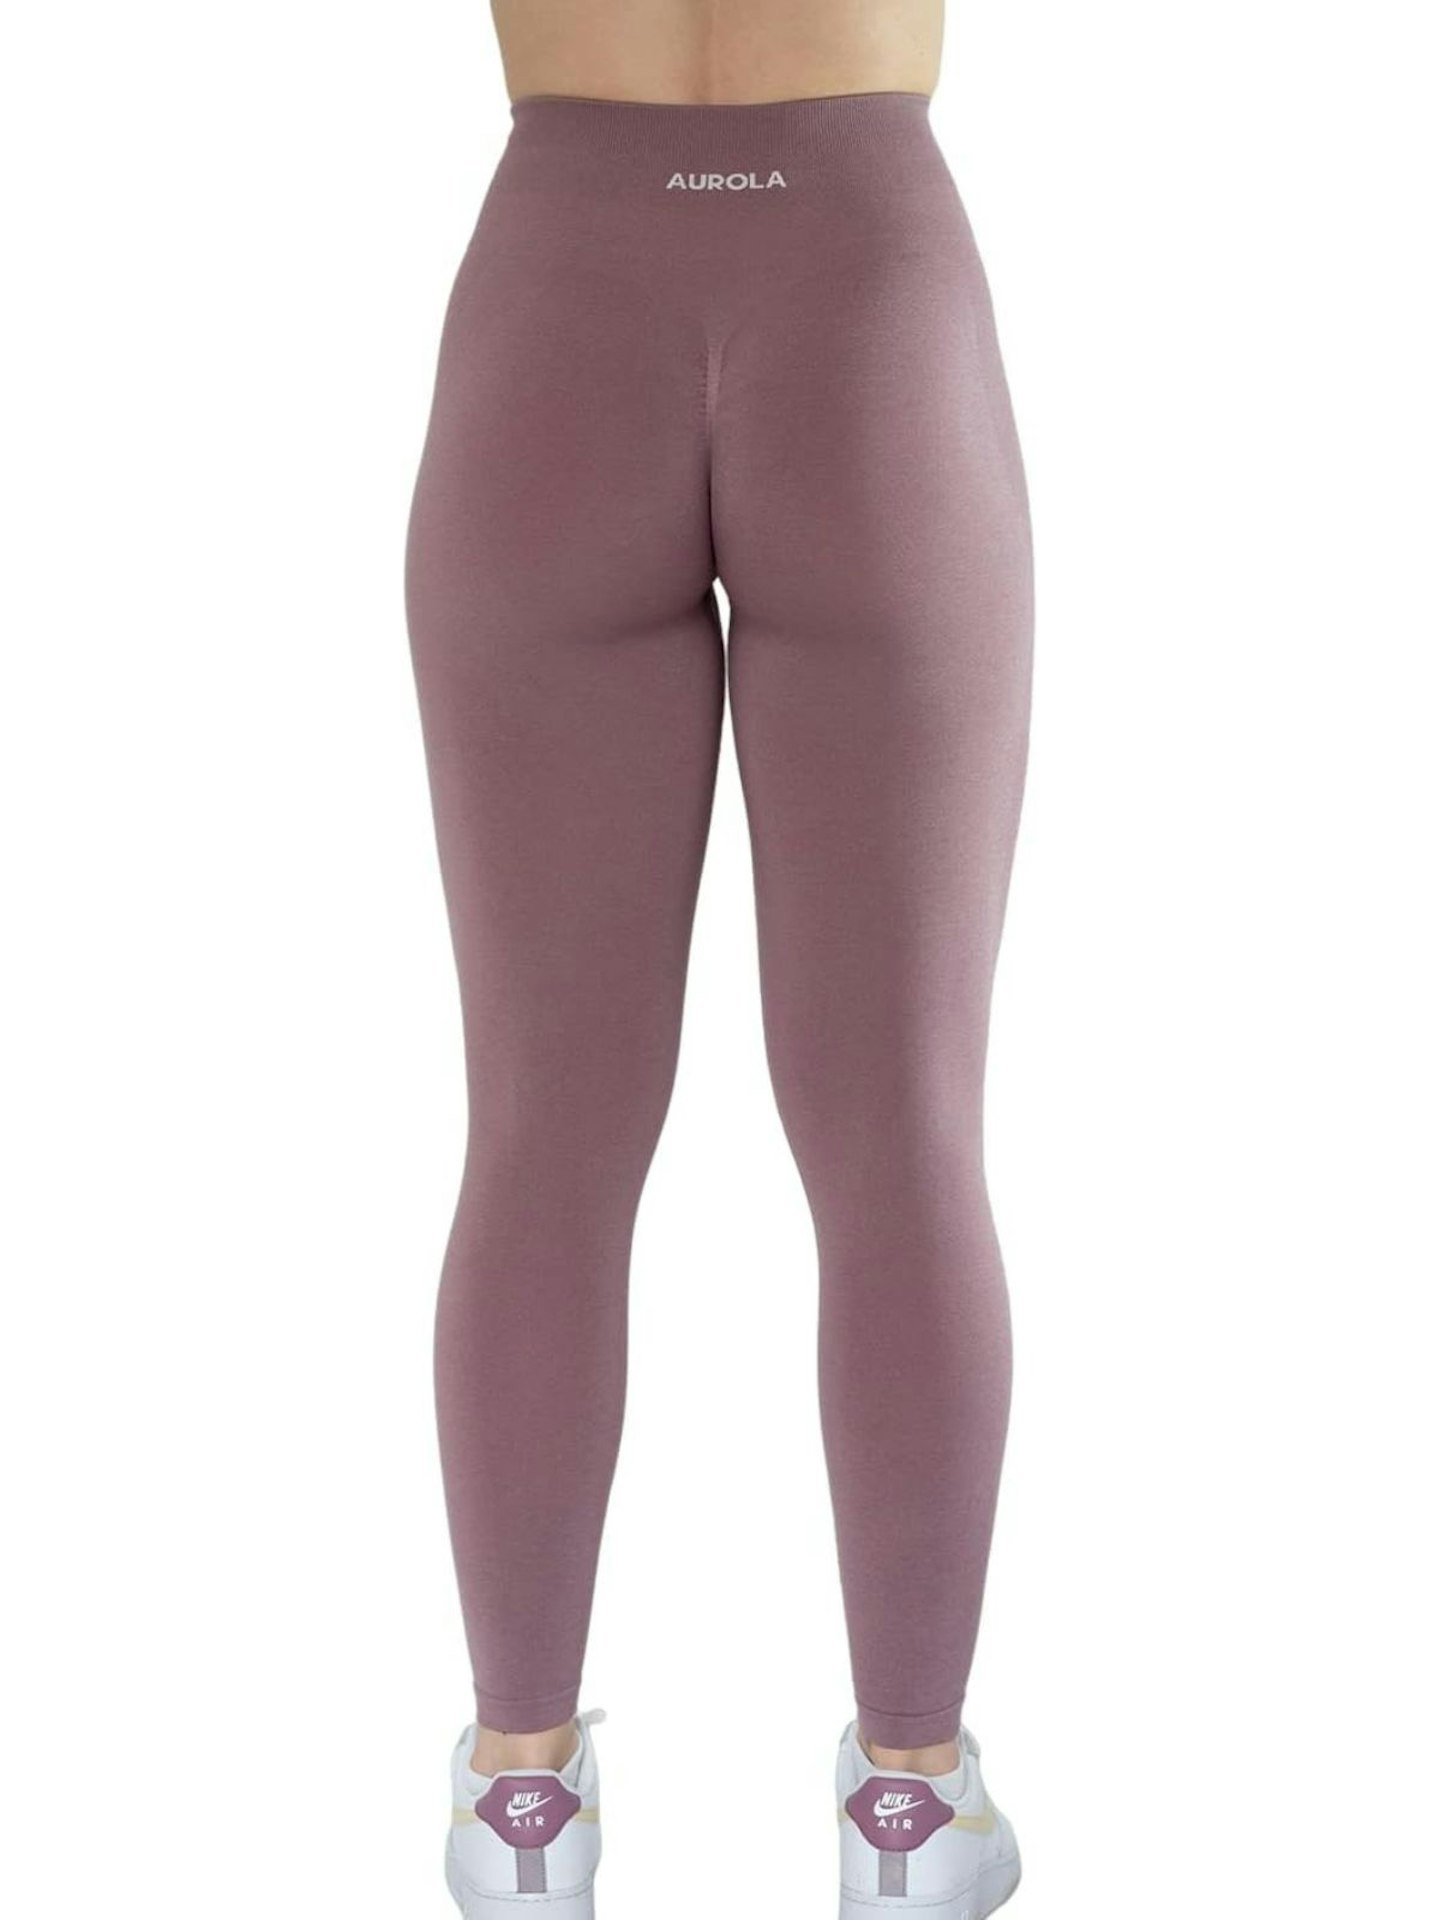 What Are The Best Scrunch Bum Leggings